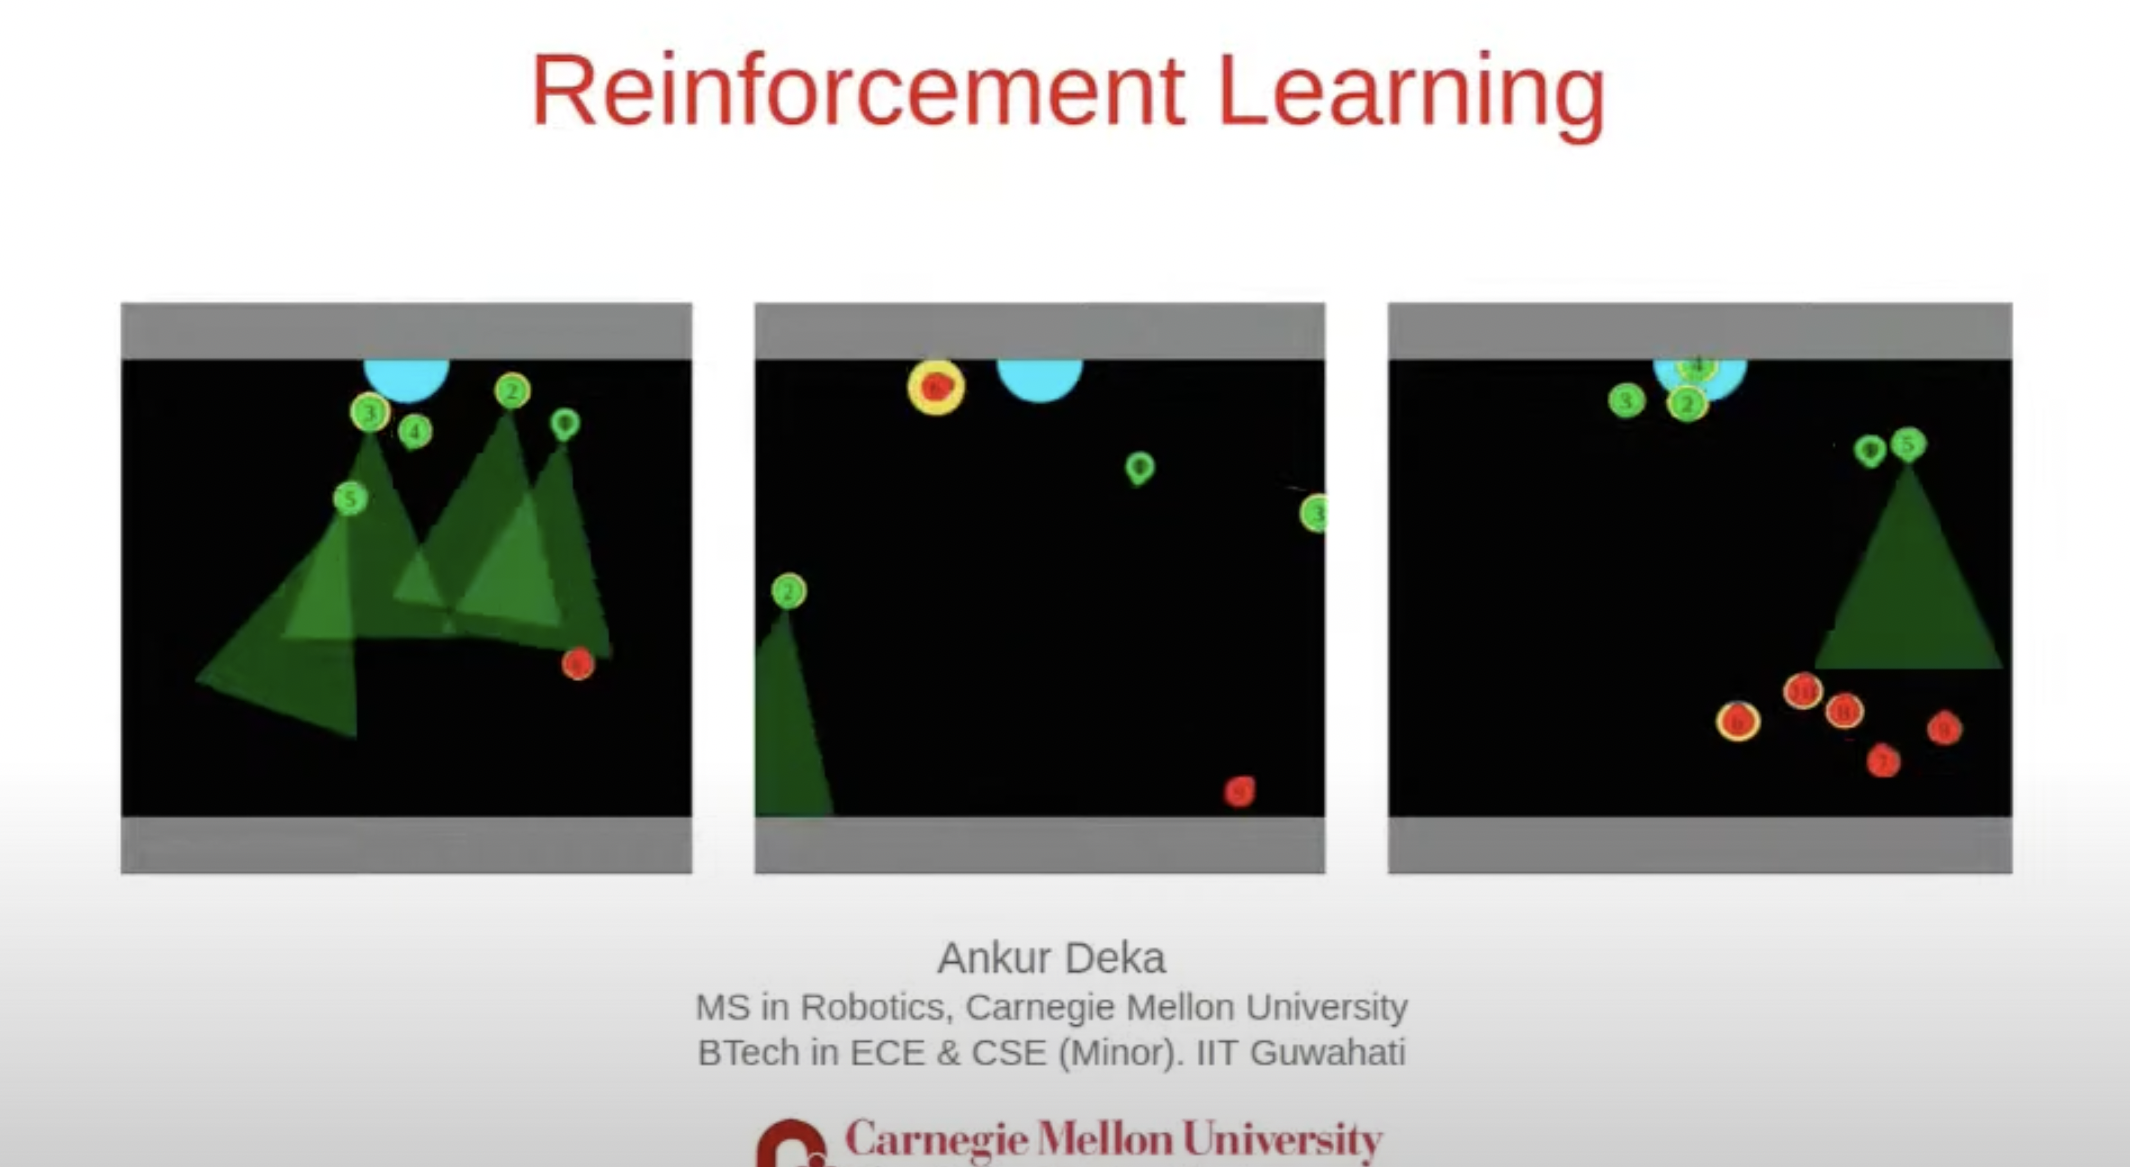 Reinforcement Learning (RL) and Multi Agent RL